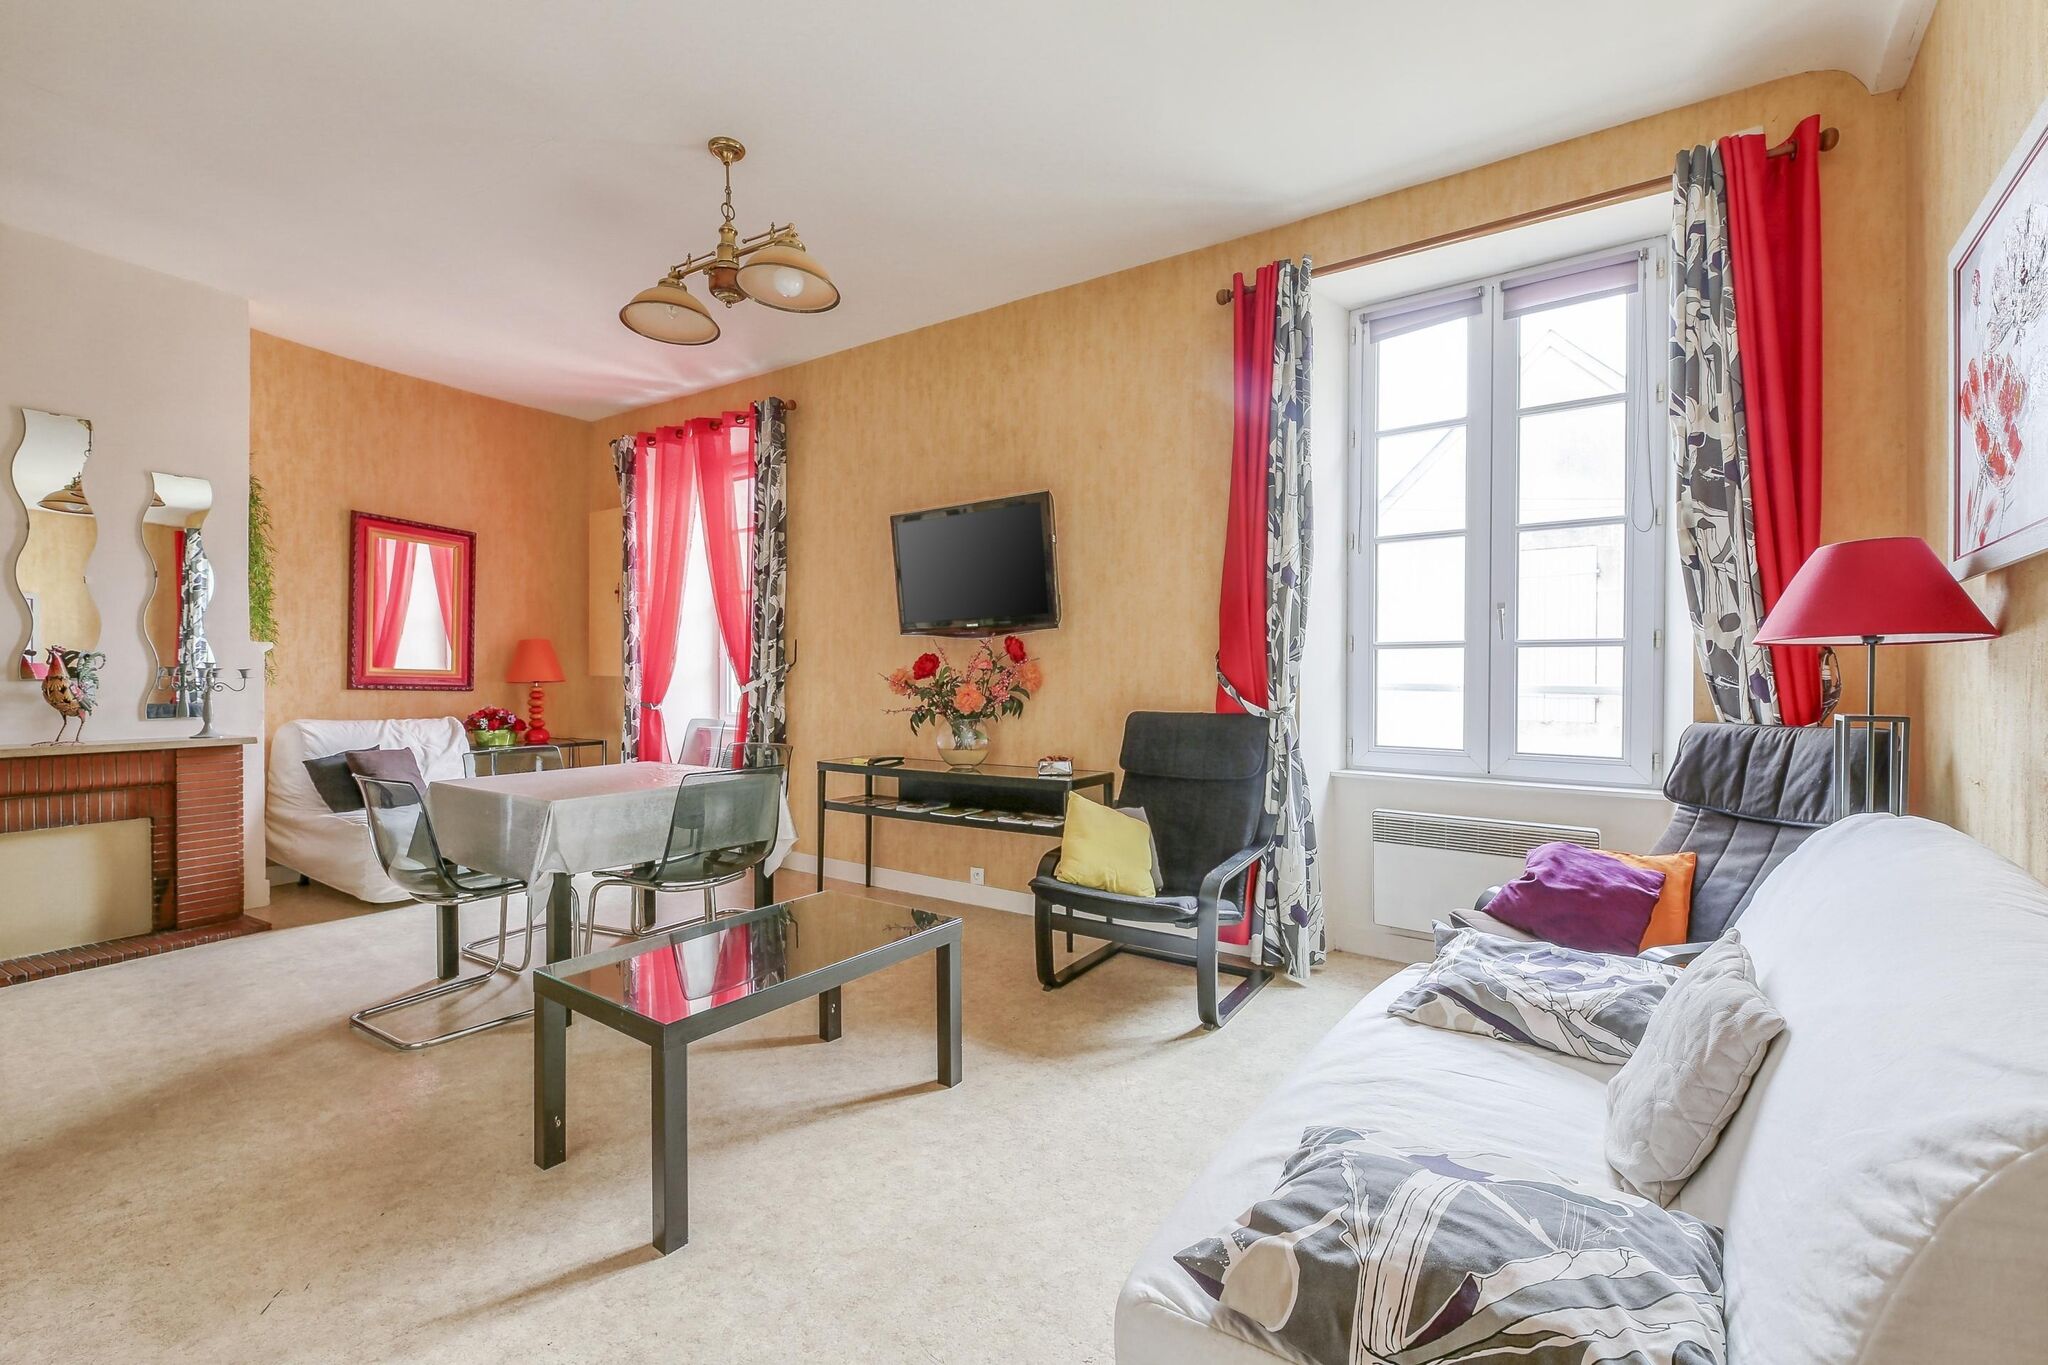 Apartment on the first floor in the heart of Bayeux, free parking 150 meters